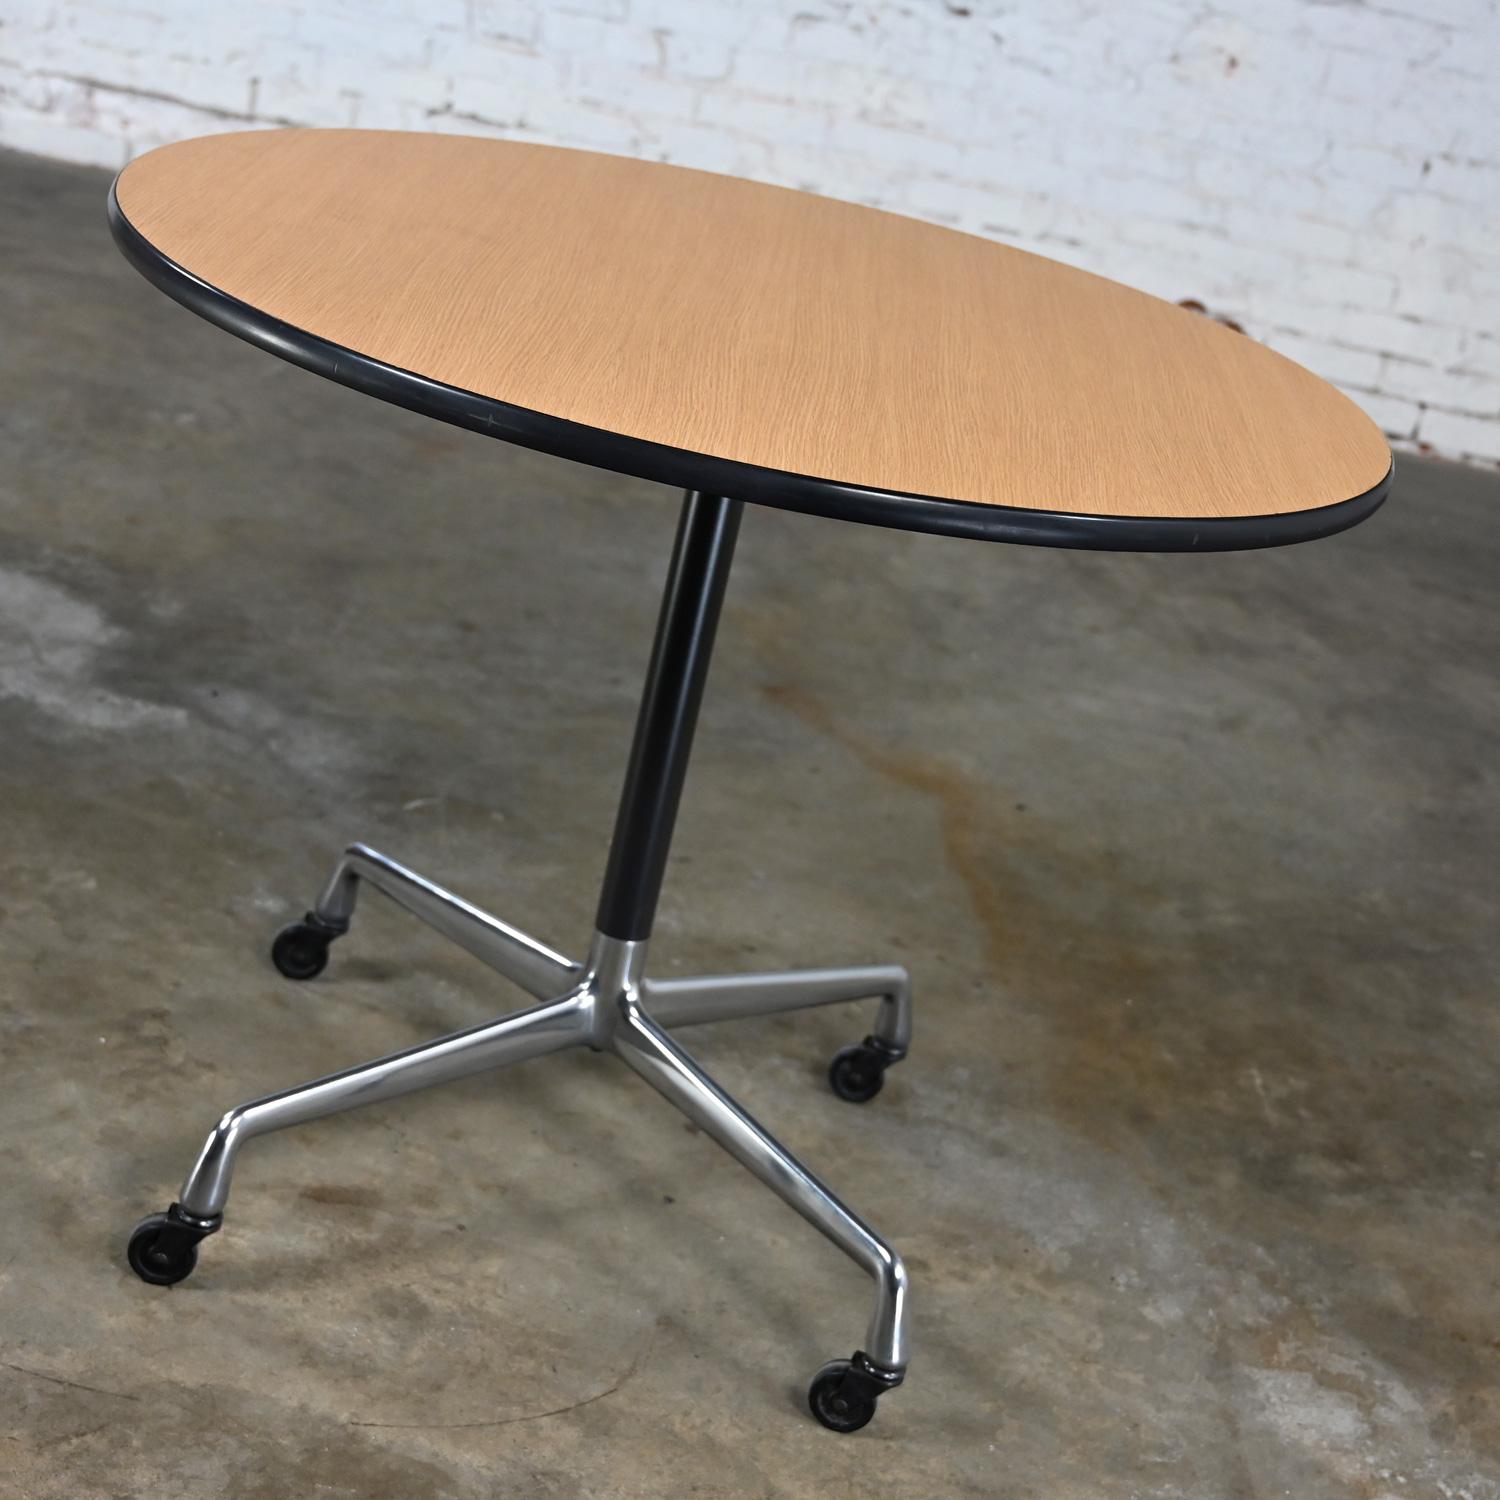 Eames Herman Miller Round Table Universal Base Casters & 36” Blonde Laminate Top For Sale 3